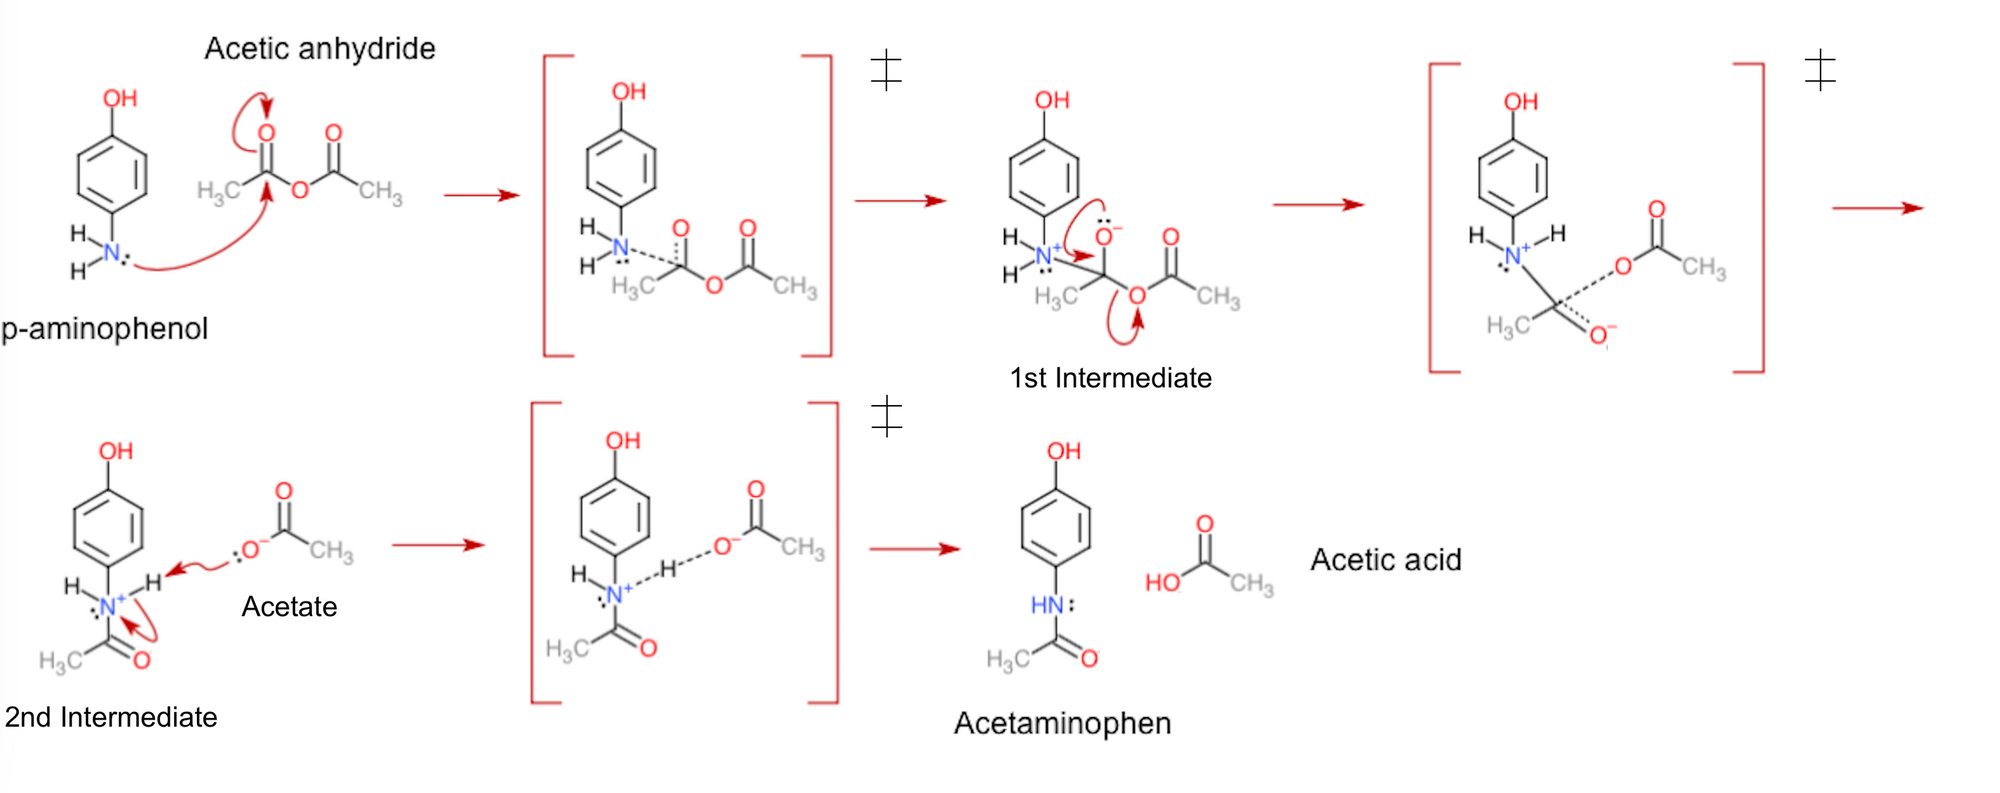 The reaction mechanism of acetaminophen/tylenol synthesis, including all transition states